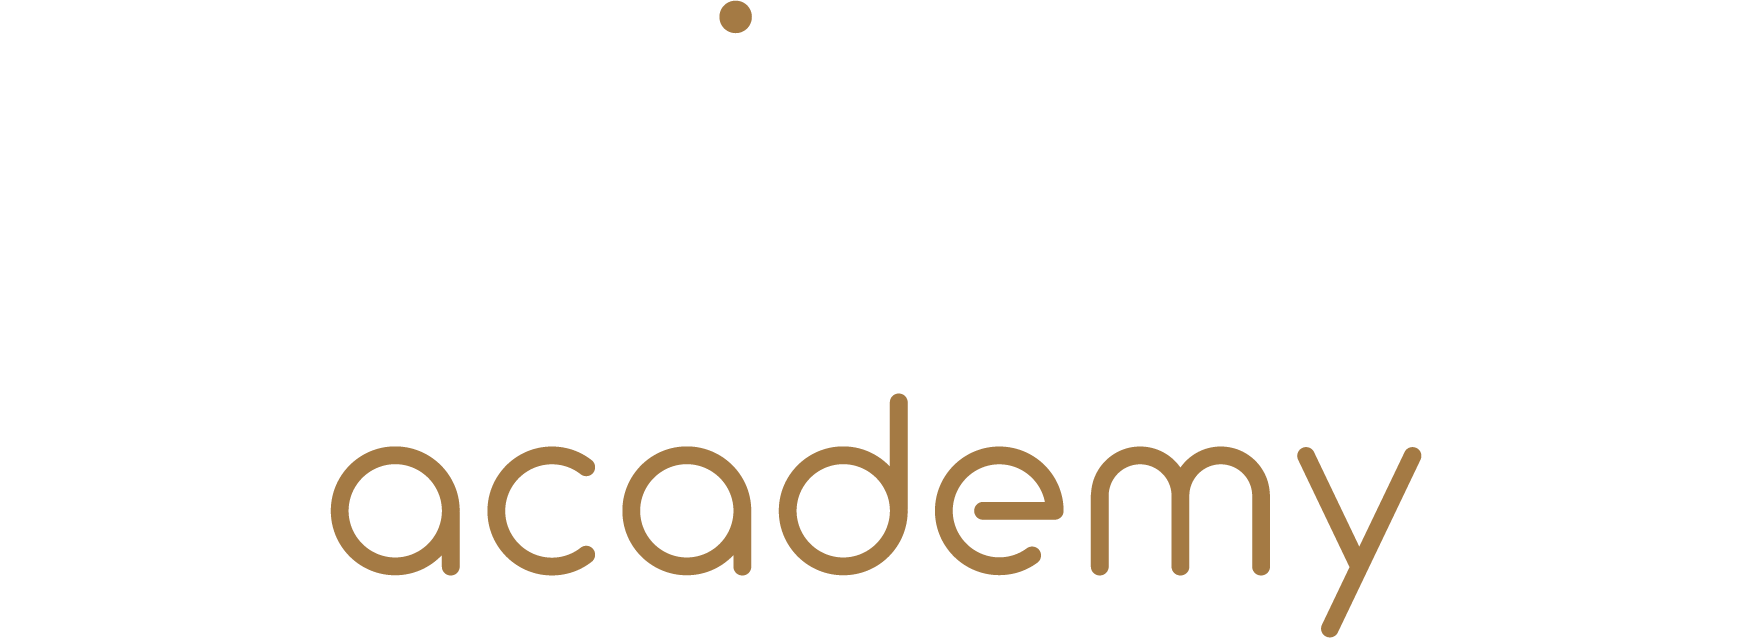 Delivery Academy